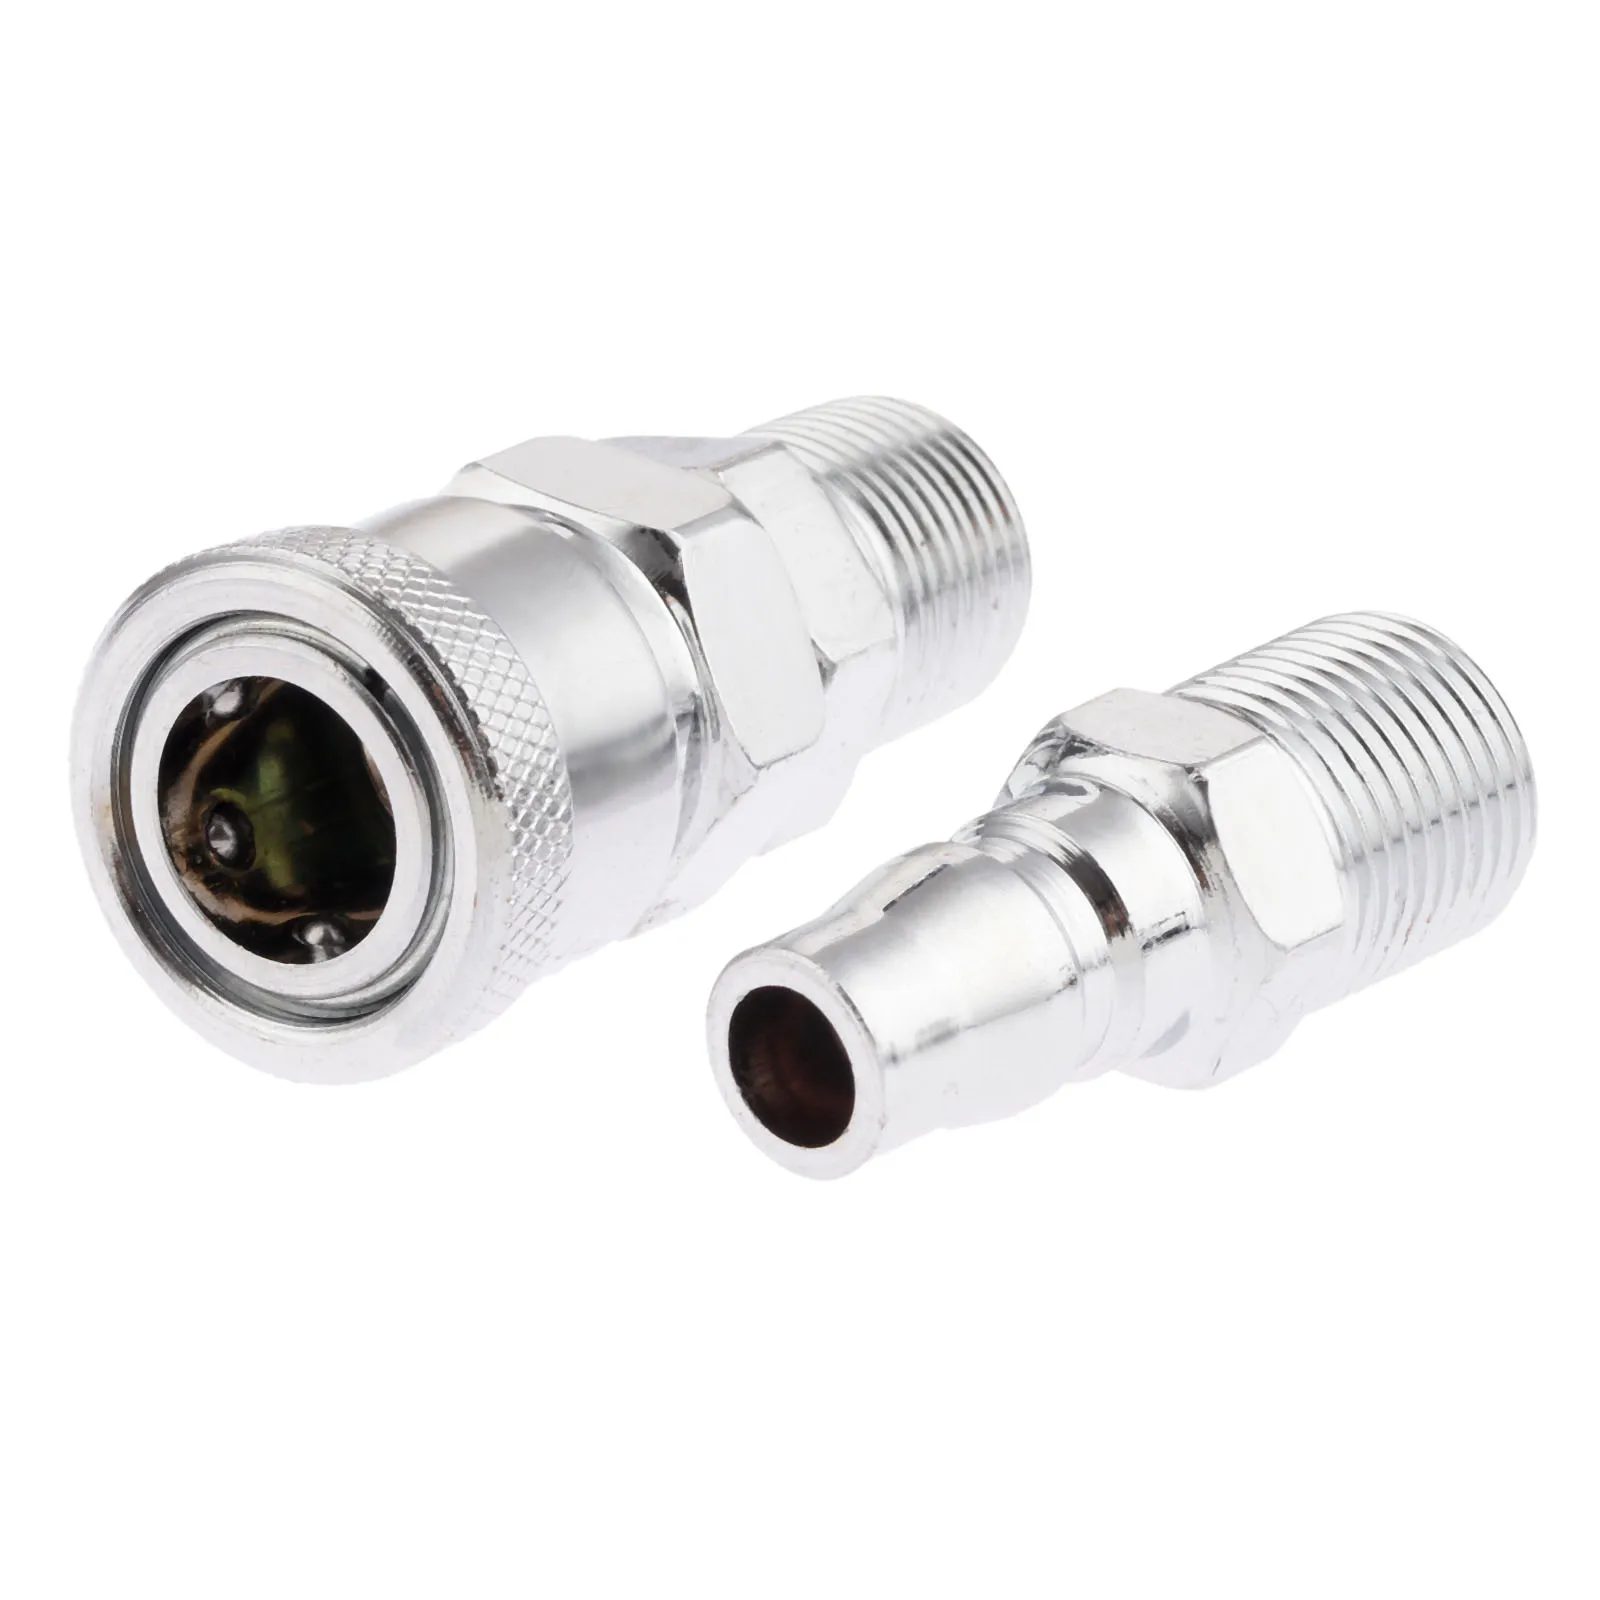 Euro Air Line Hose End Coupler Connector Fitting Bayonet Socket Push In 8mm 2 Pc